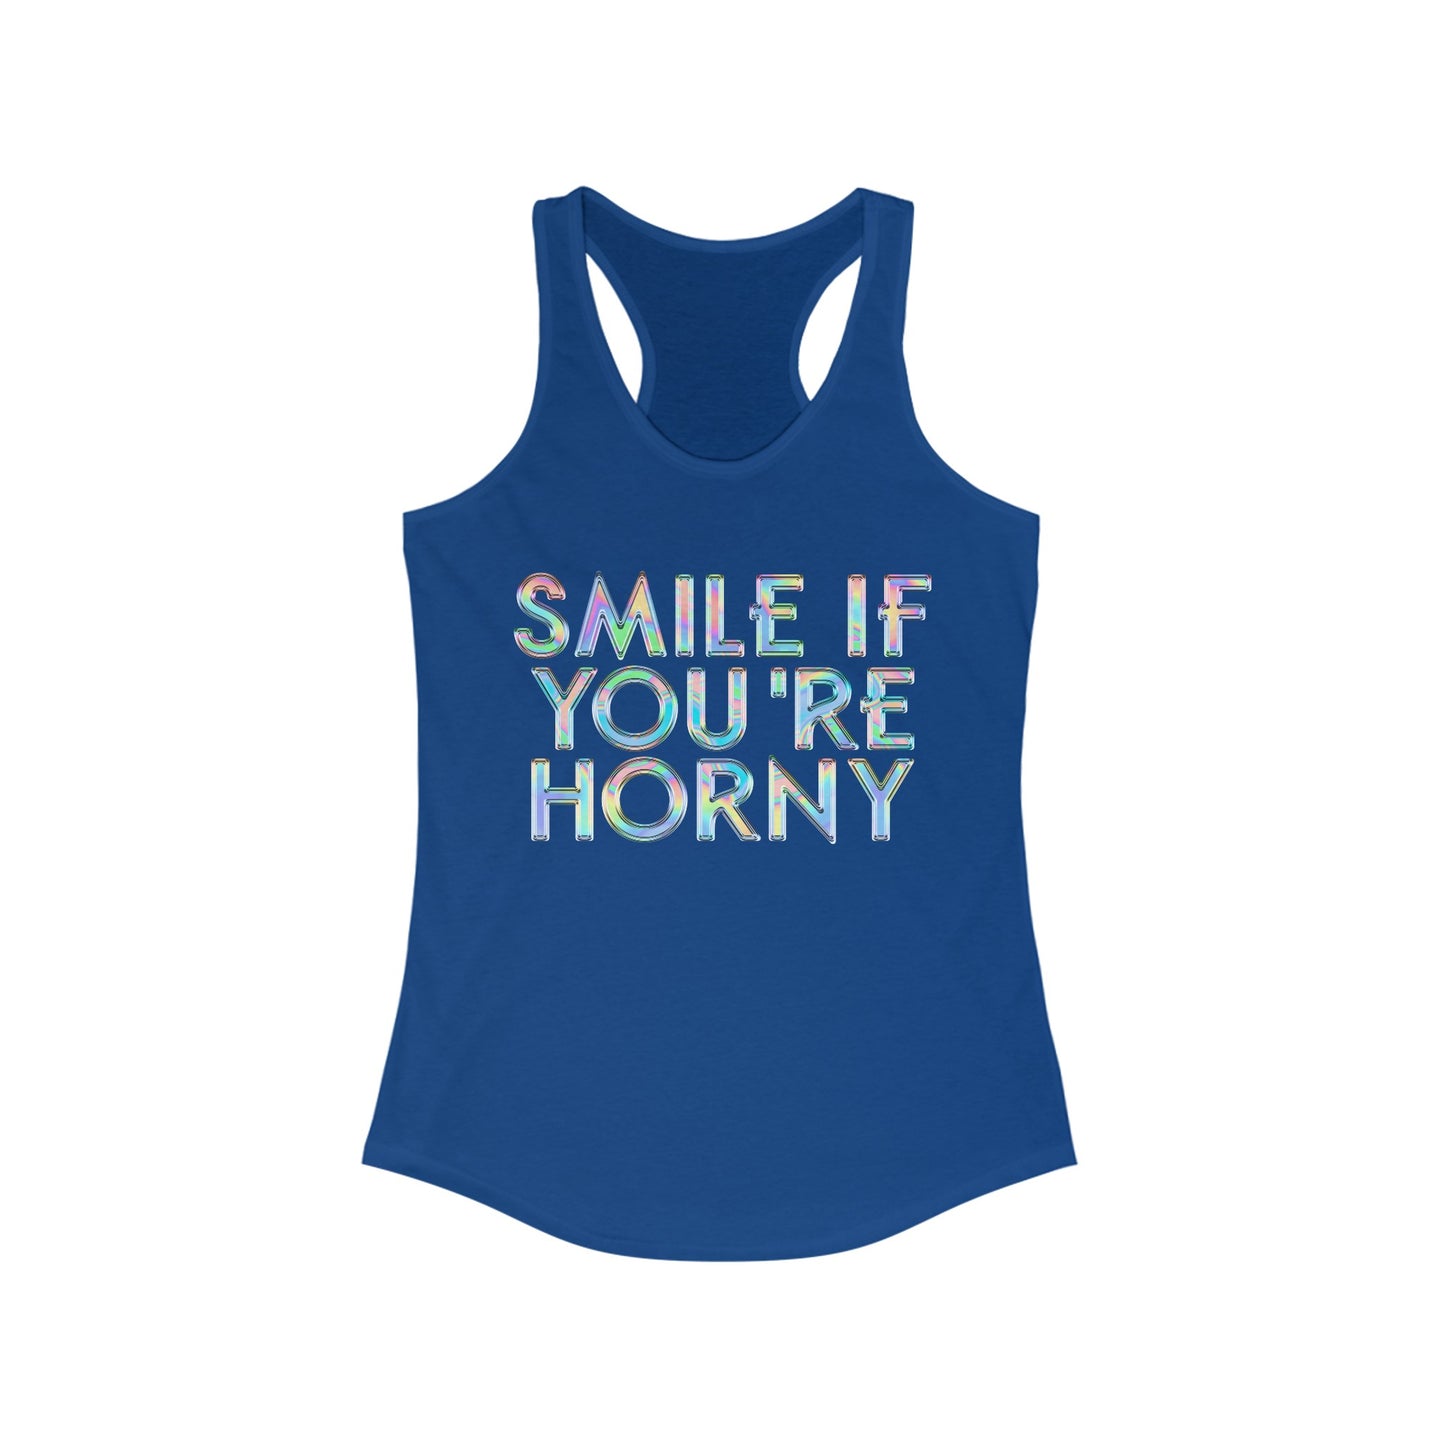 Smile If You're Horny Women's Racerback Tank Top